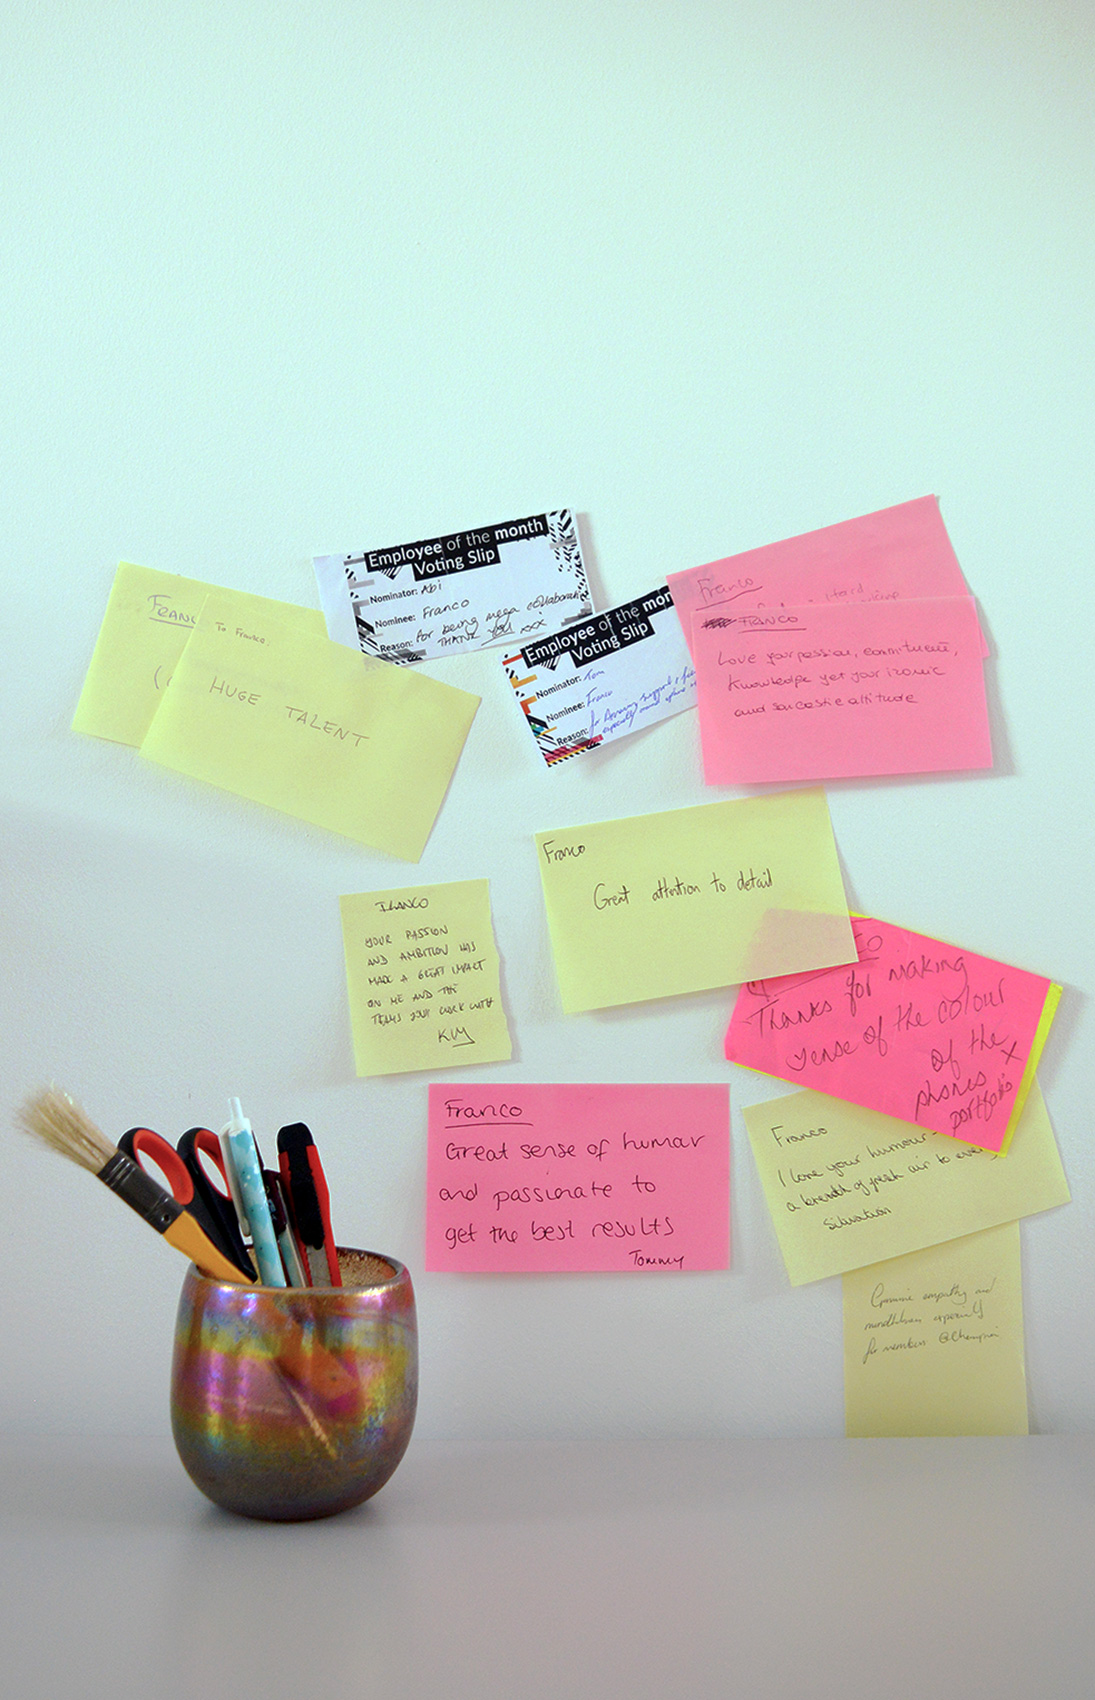 A picture with post its where colleagues have written positive feedback as we worked together